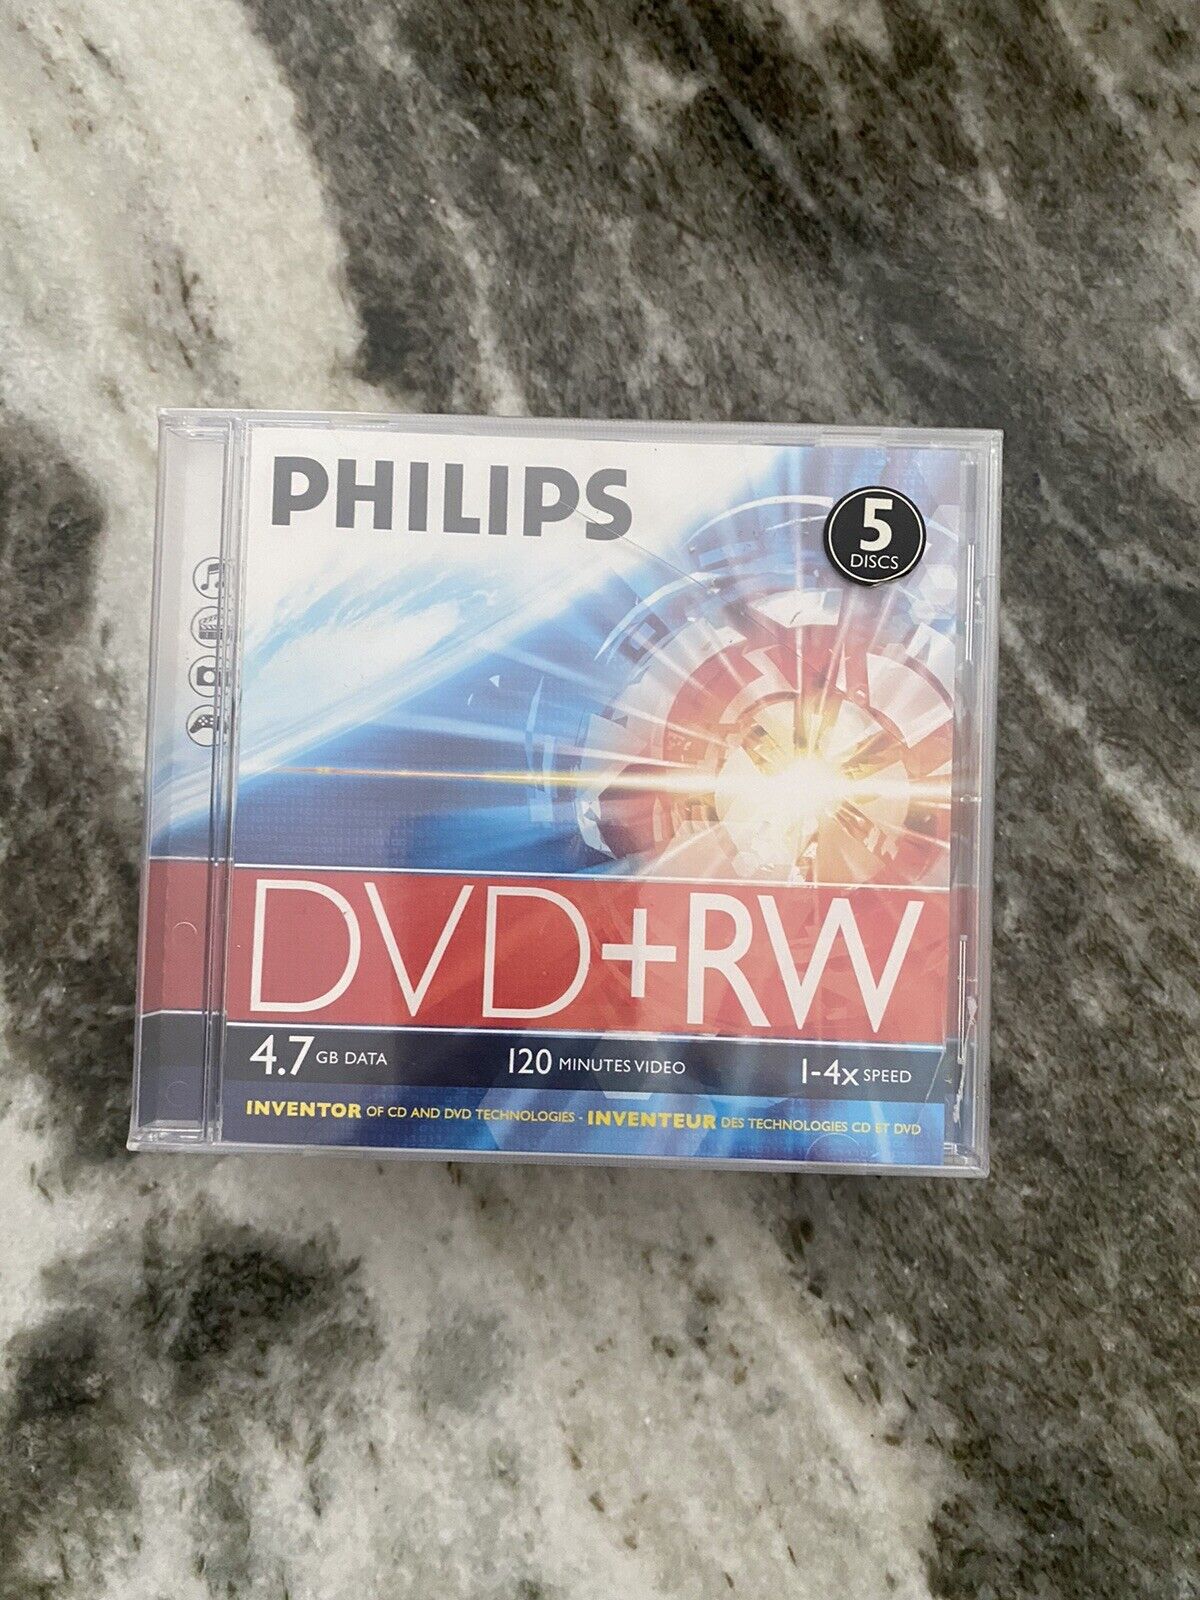 Philips DVD+RW 4.7GB 120 Minute 5 Pack New Recordable Disks 1-4X Speed Sealed